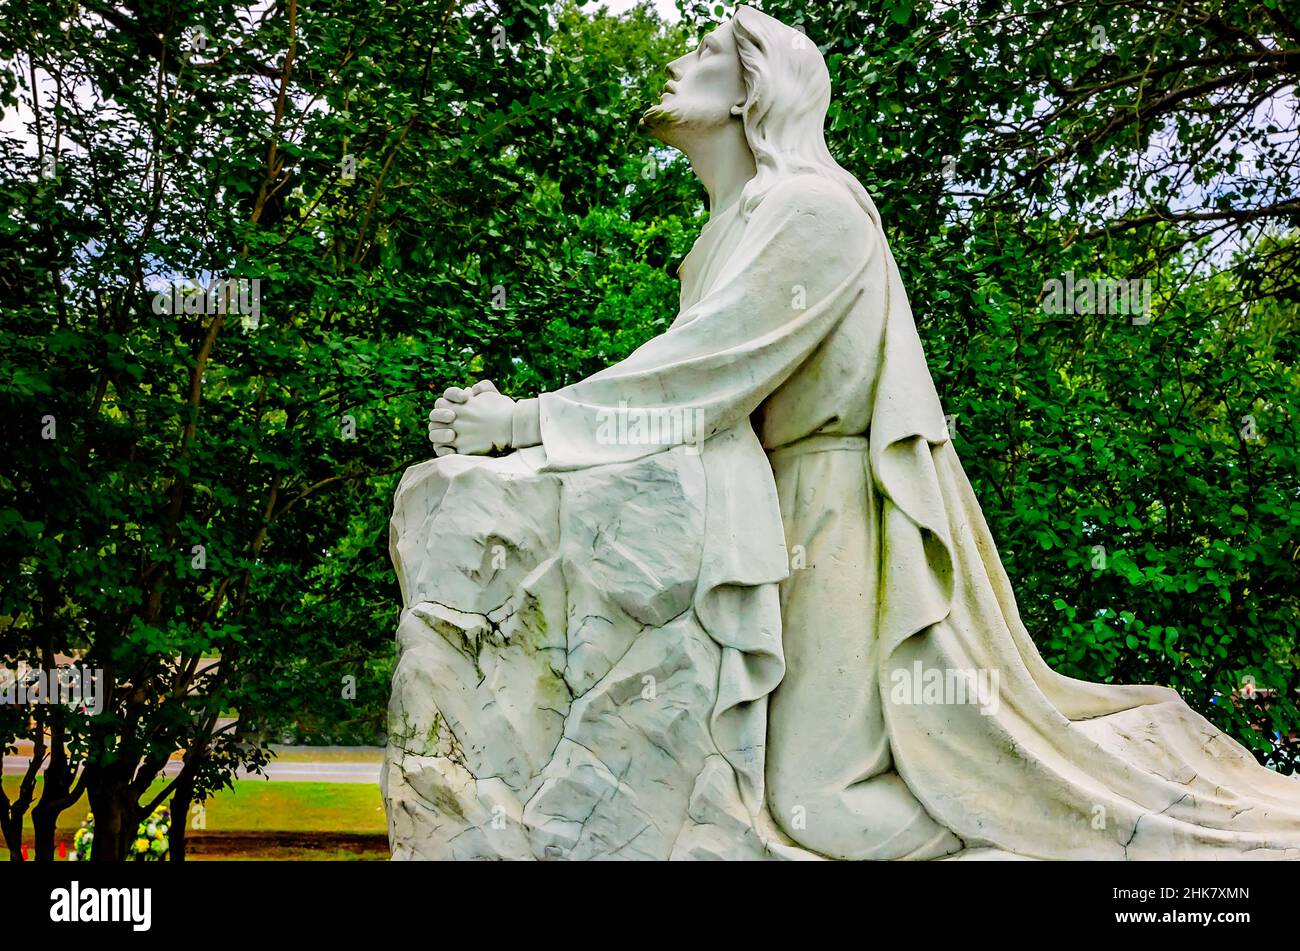 A statue of Jesus in the Garden of Gethsemane is pictured at Memory Hill Gardens, Aug. 24, 2019, in Tuscaloosa, Alabama. Stock Photo